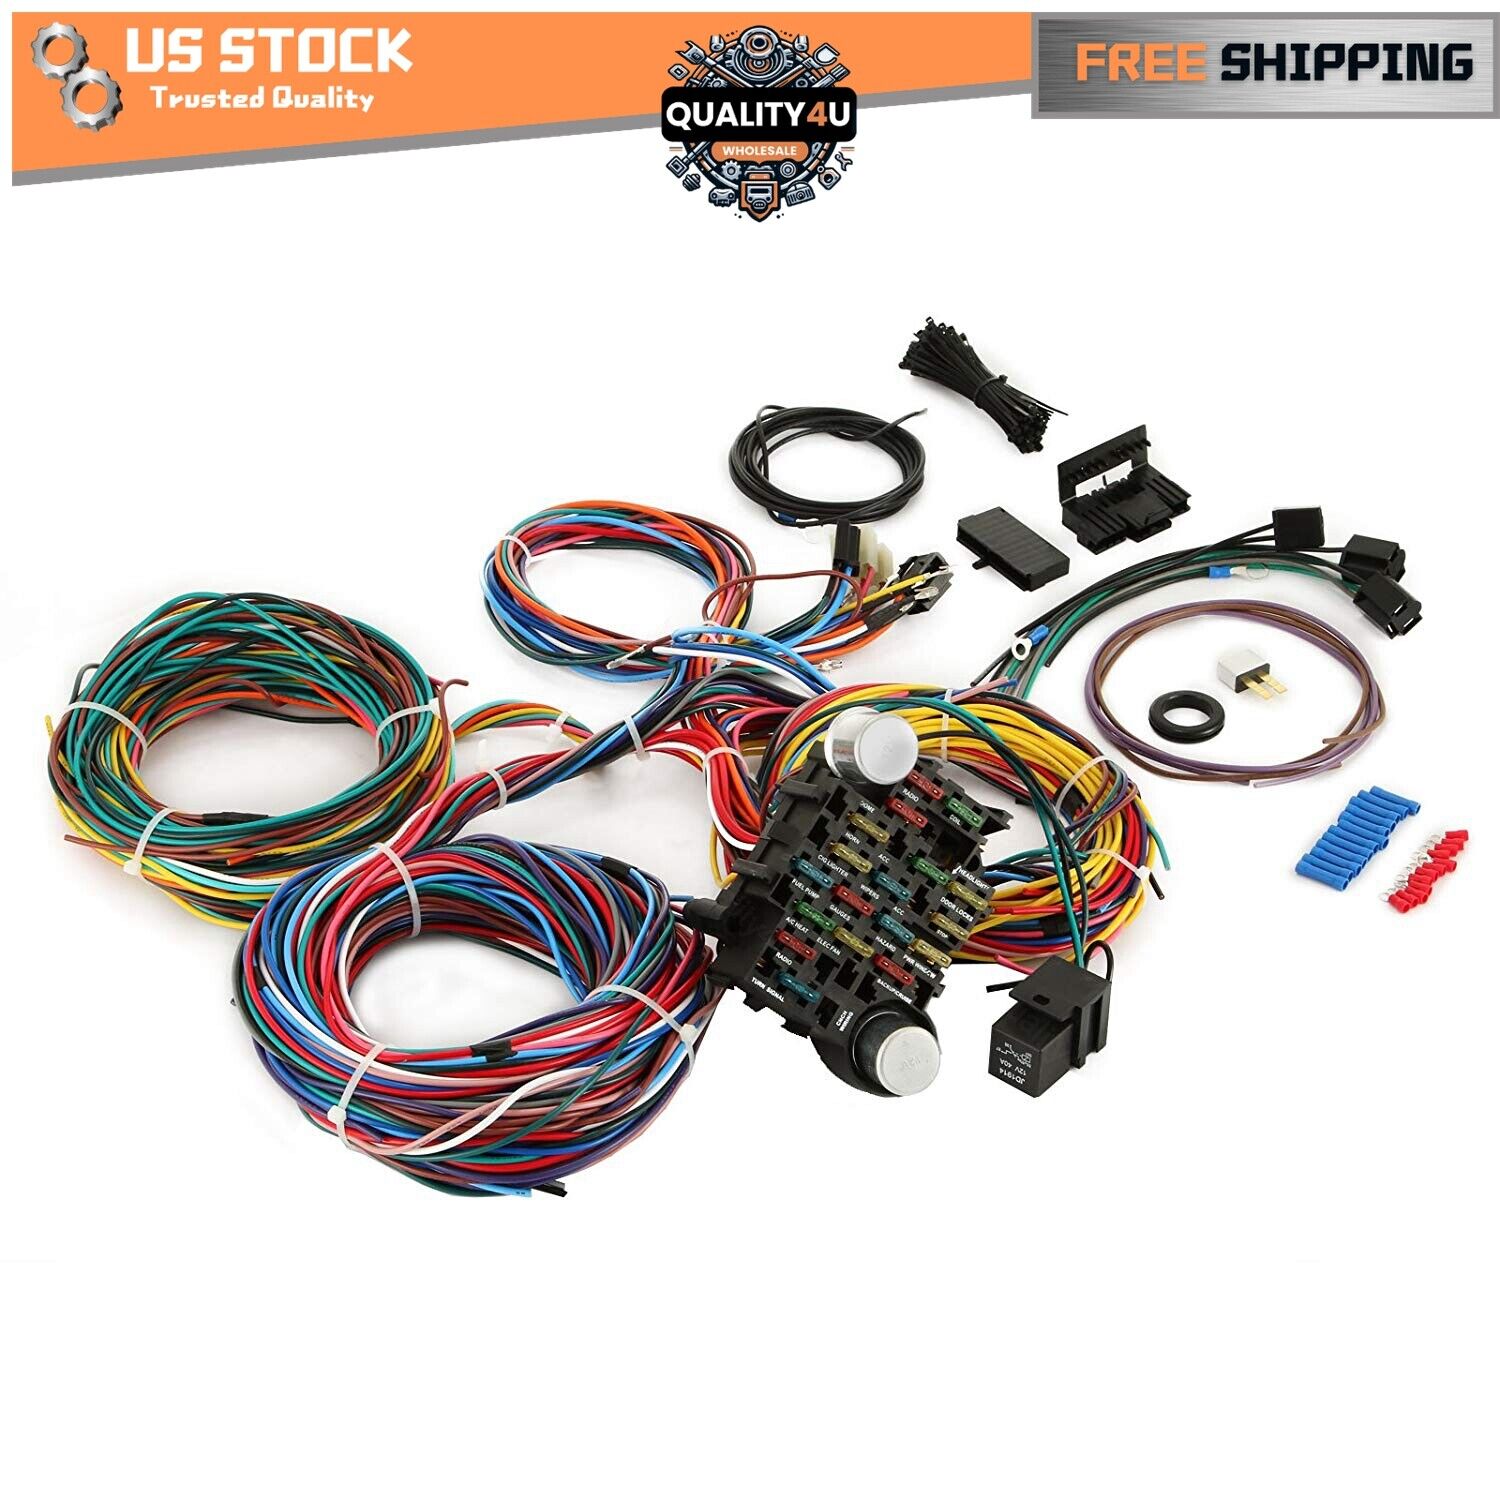 12 Circuit Harness Hot Rod with Color Wires